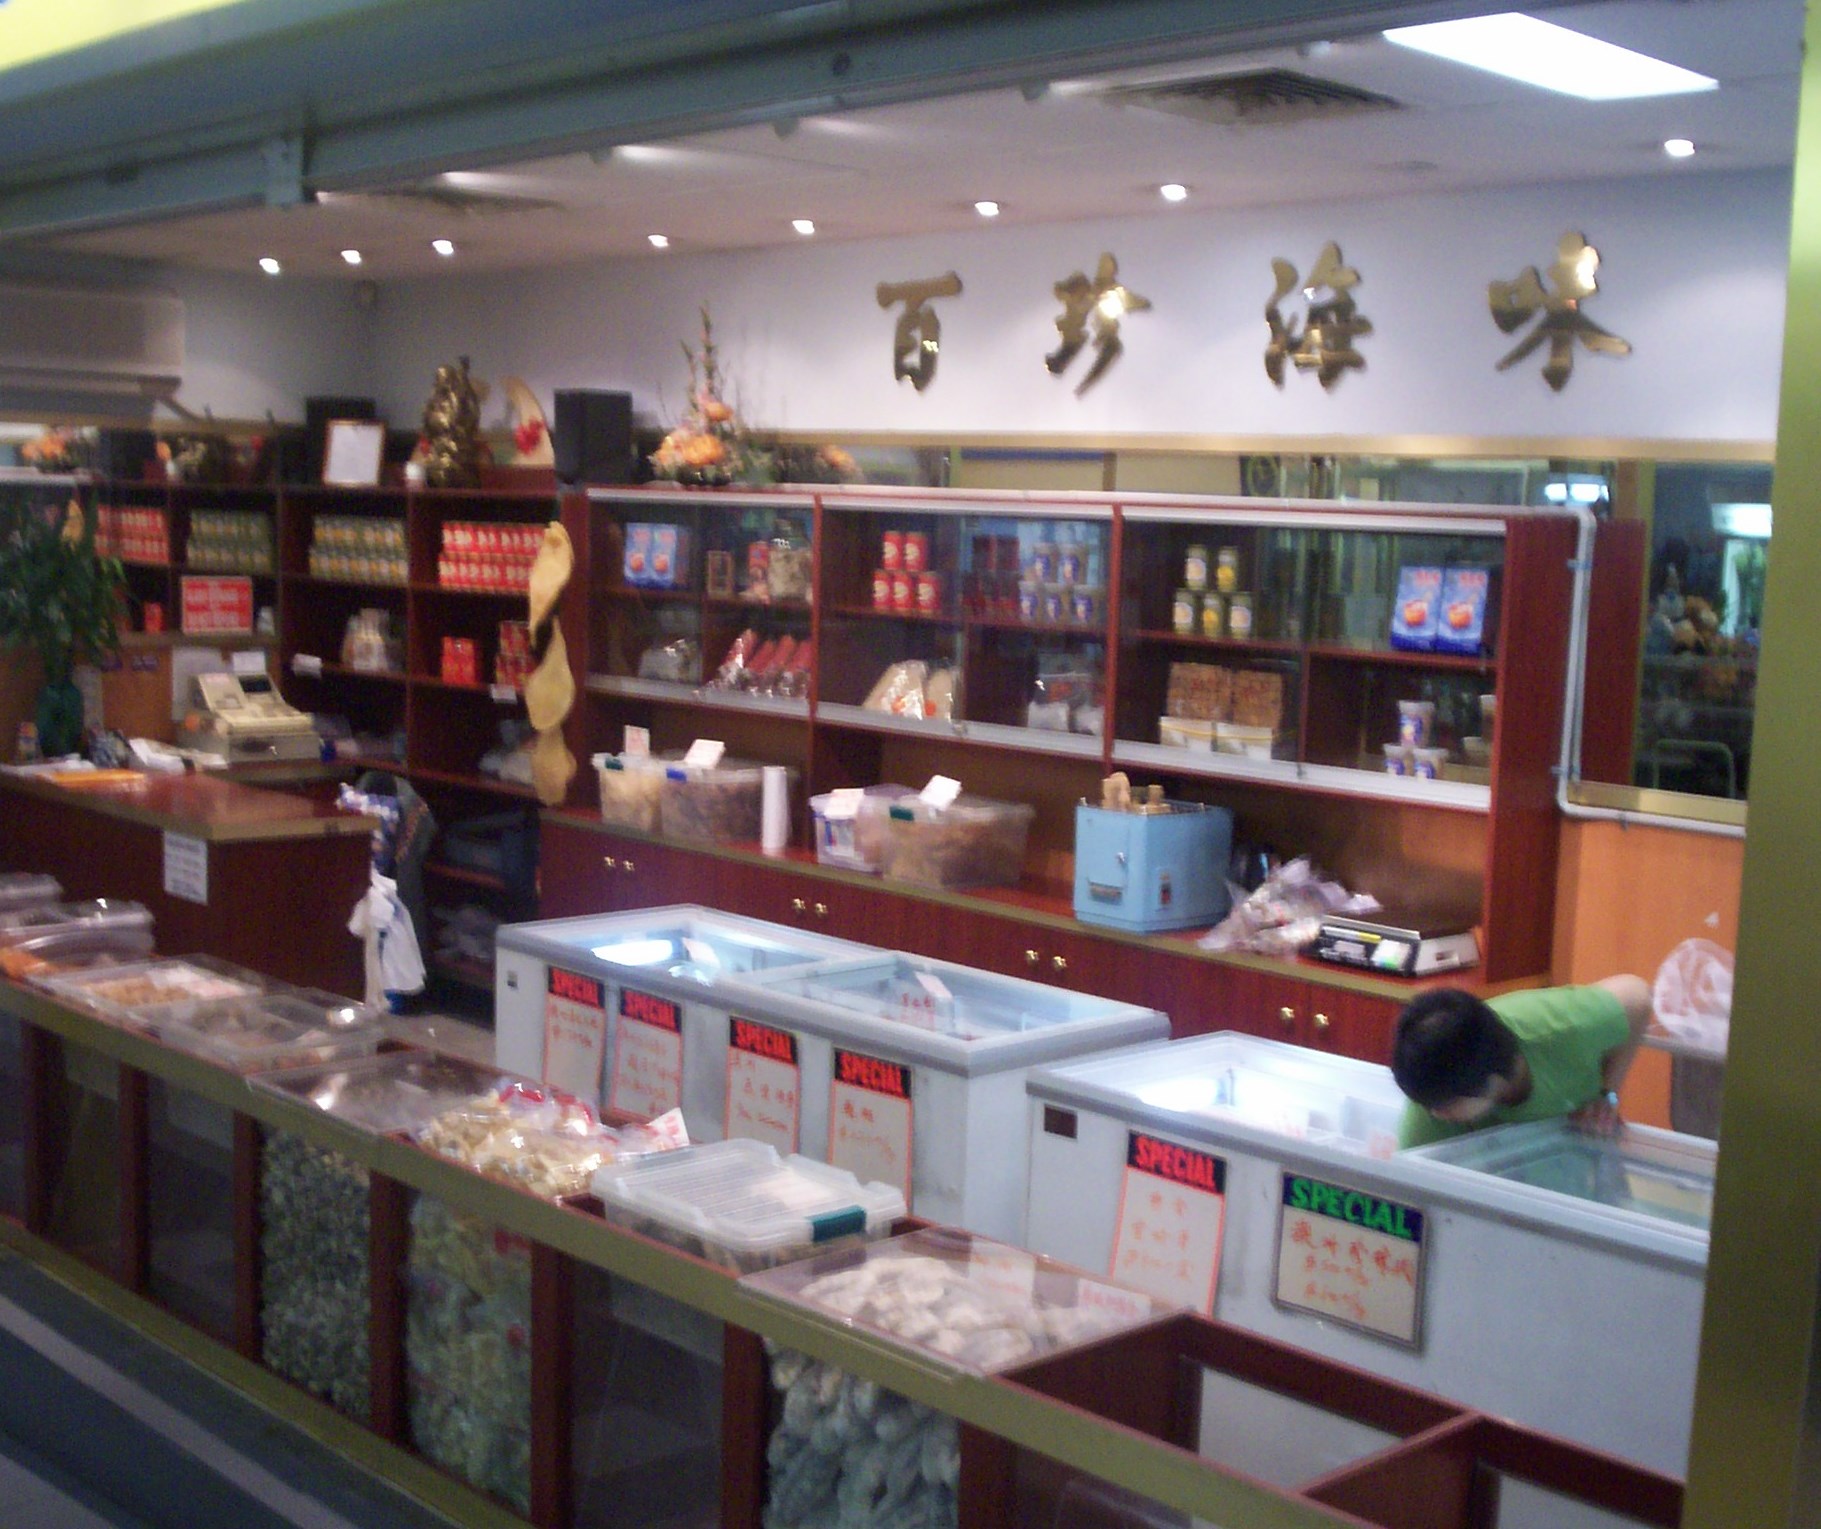 there is a large store filled with goods and people